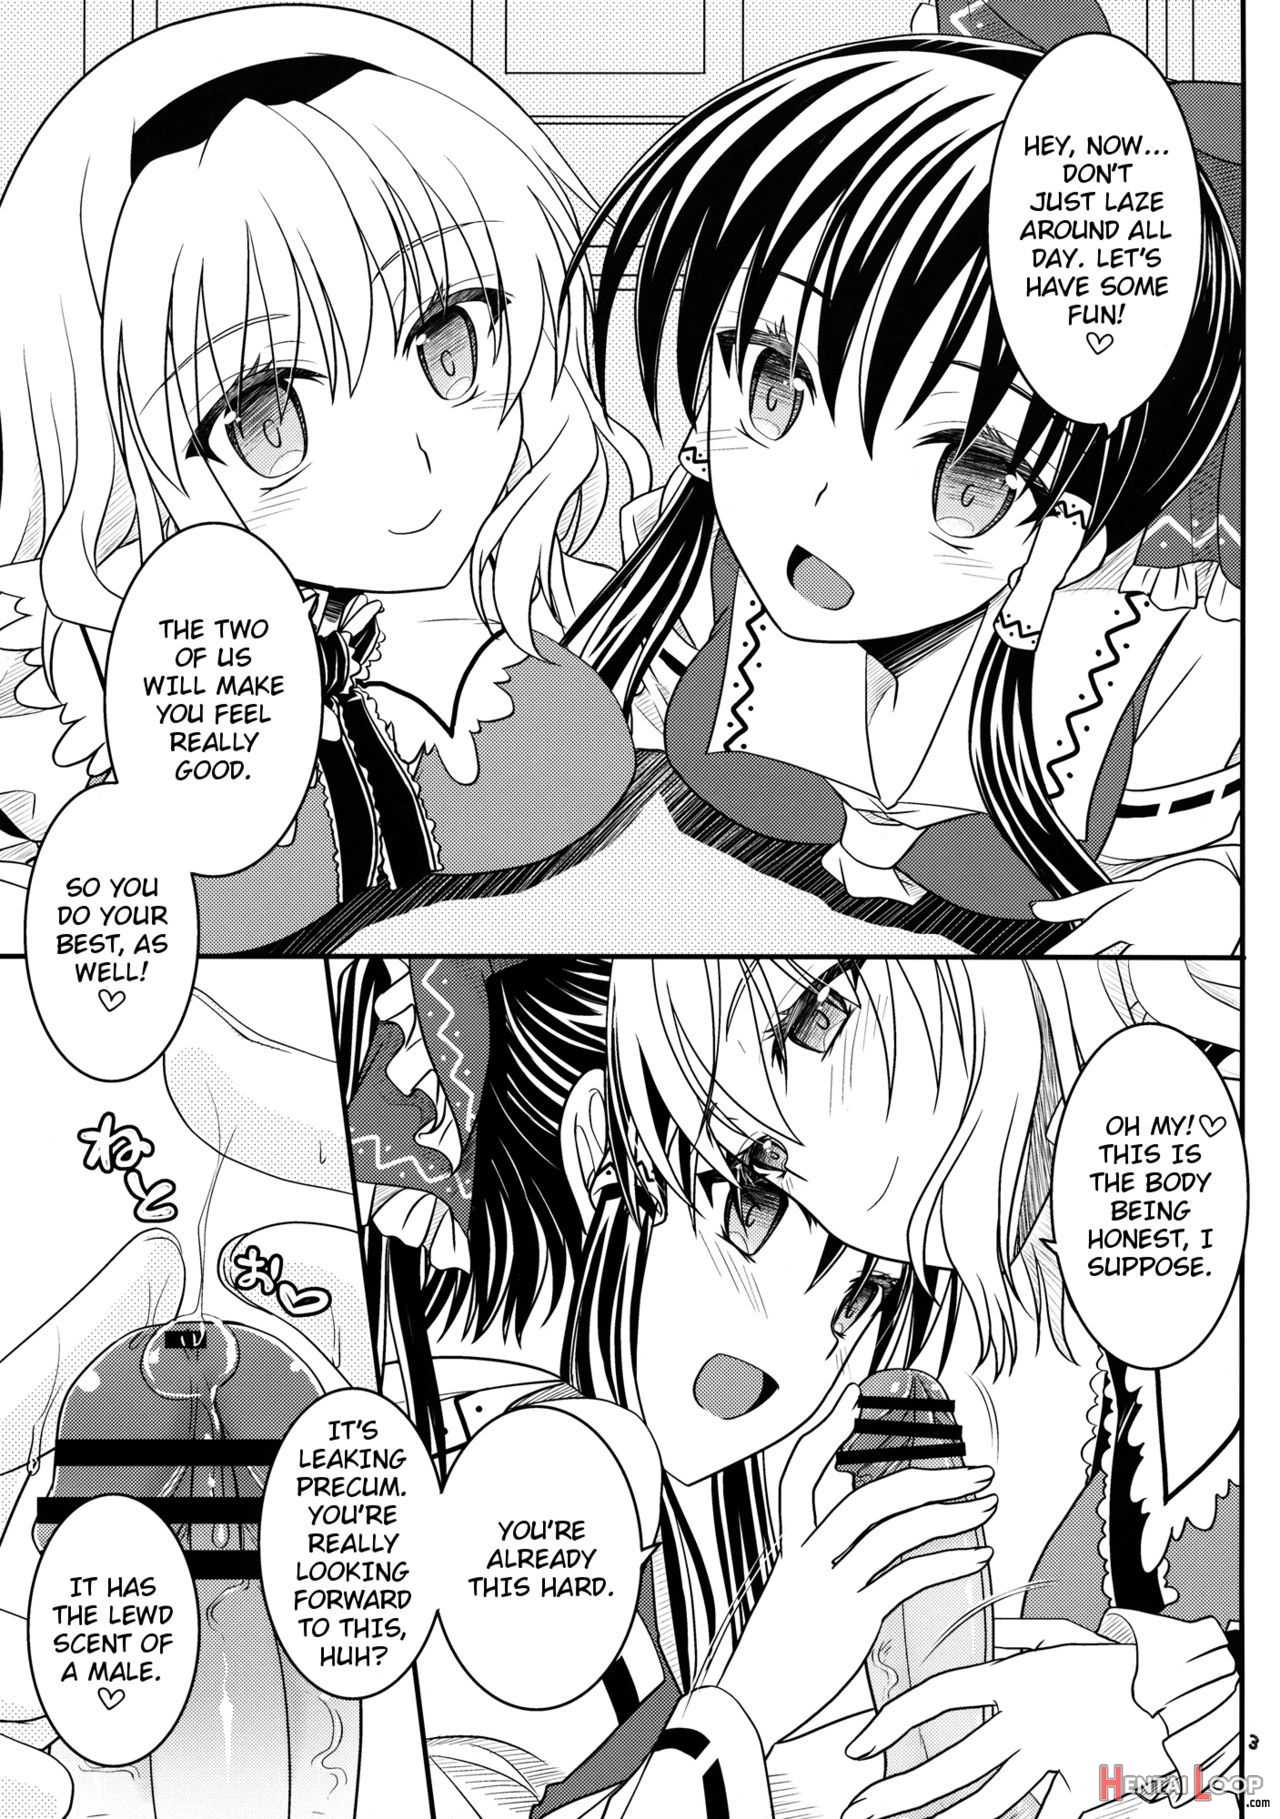 With Reimu And Alice... page 2